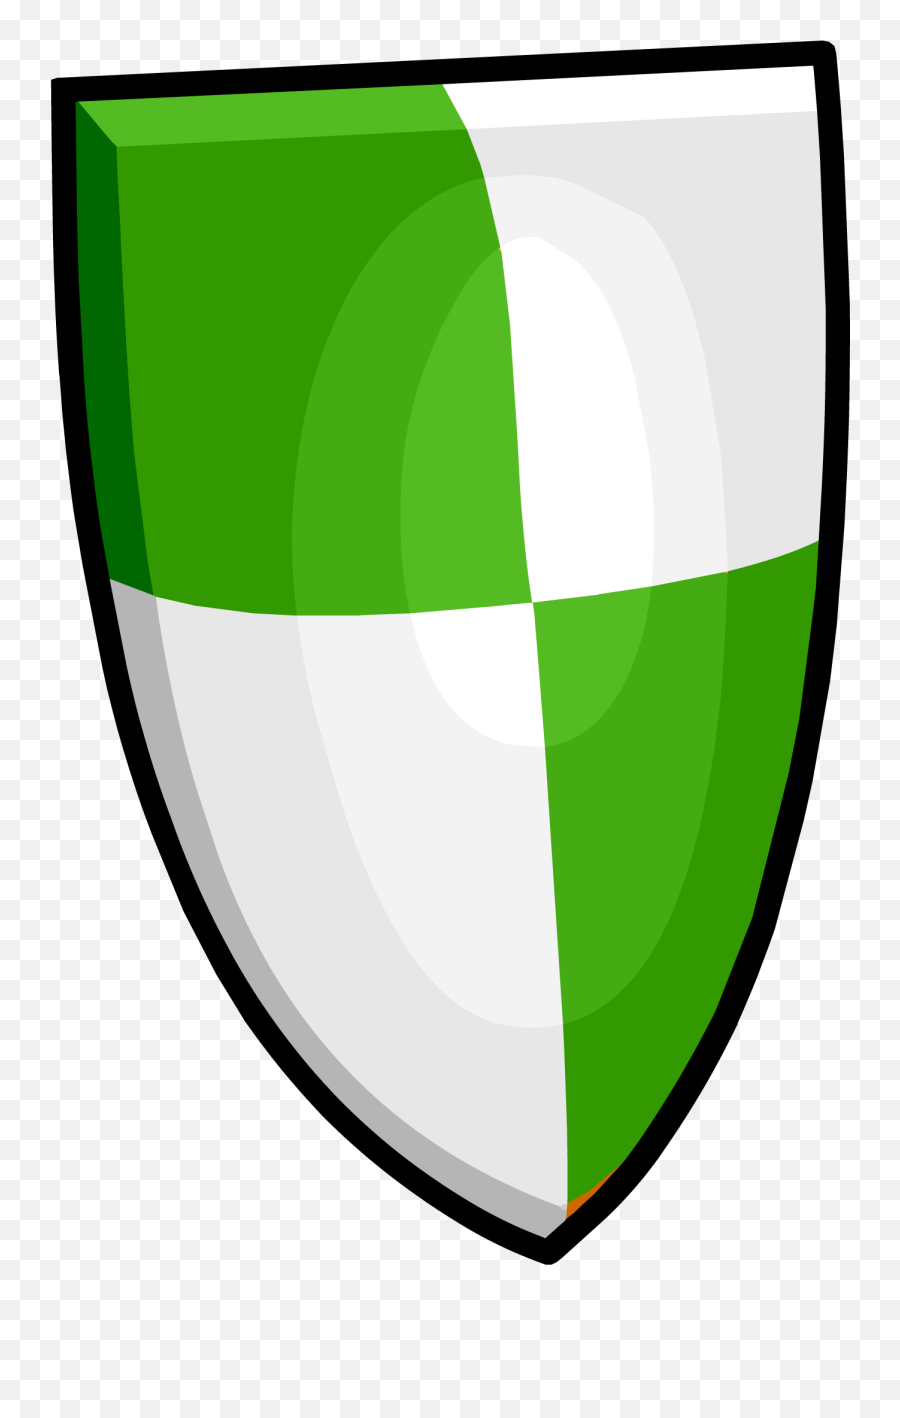 Shield Outline Png - Shield Clipart Green And Blue,Shield Outline Png